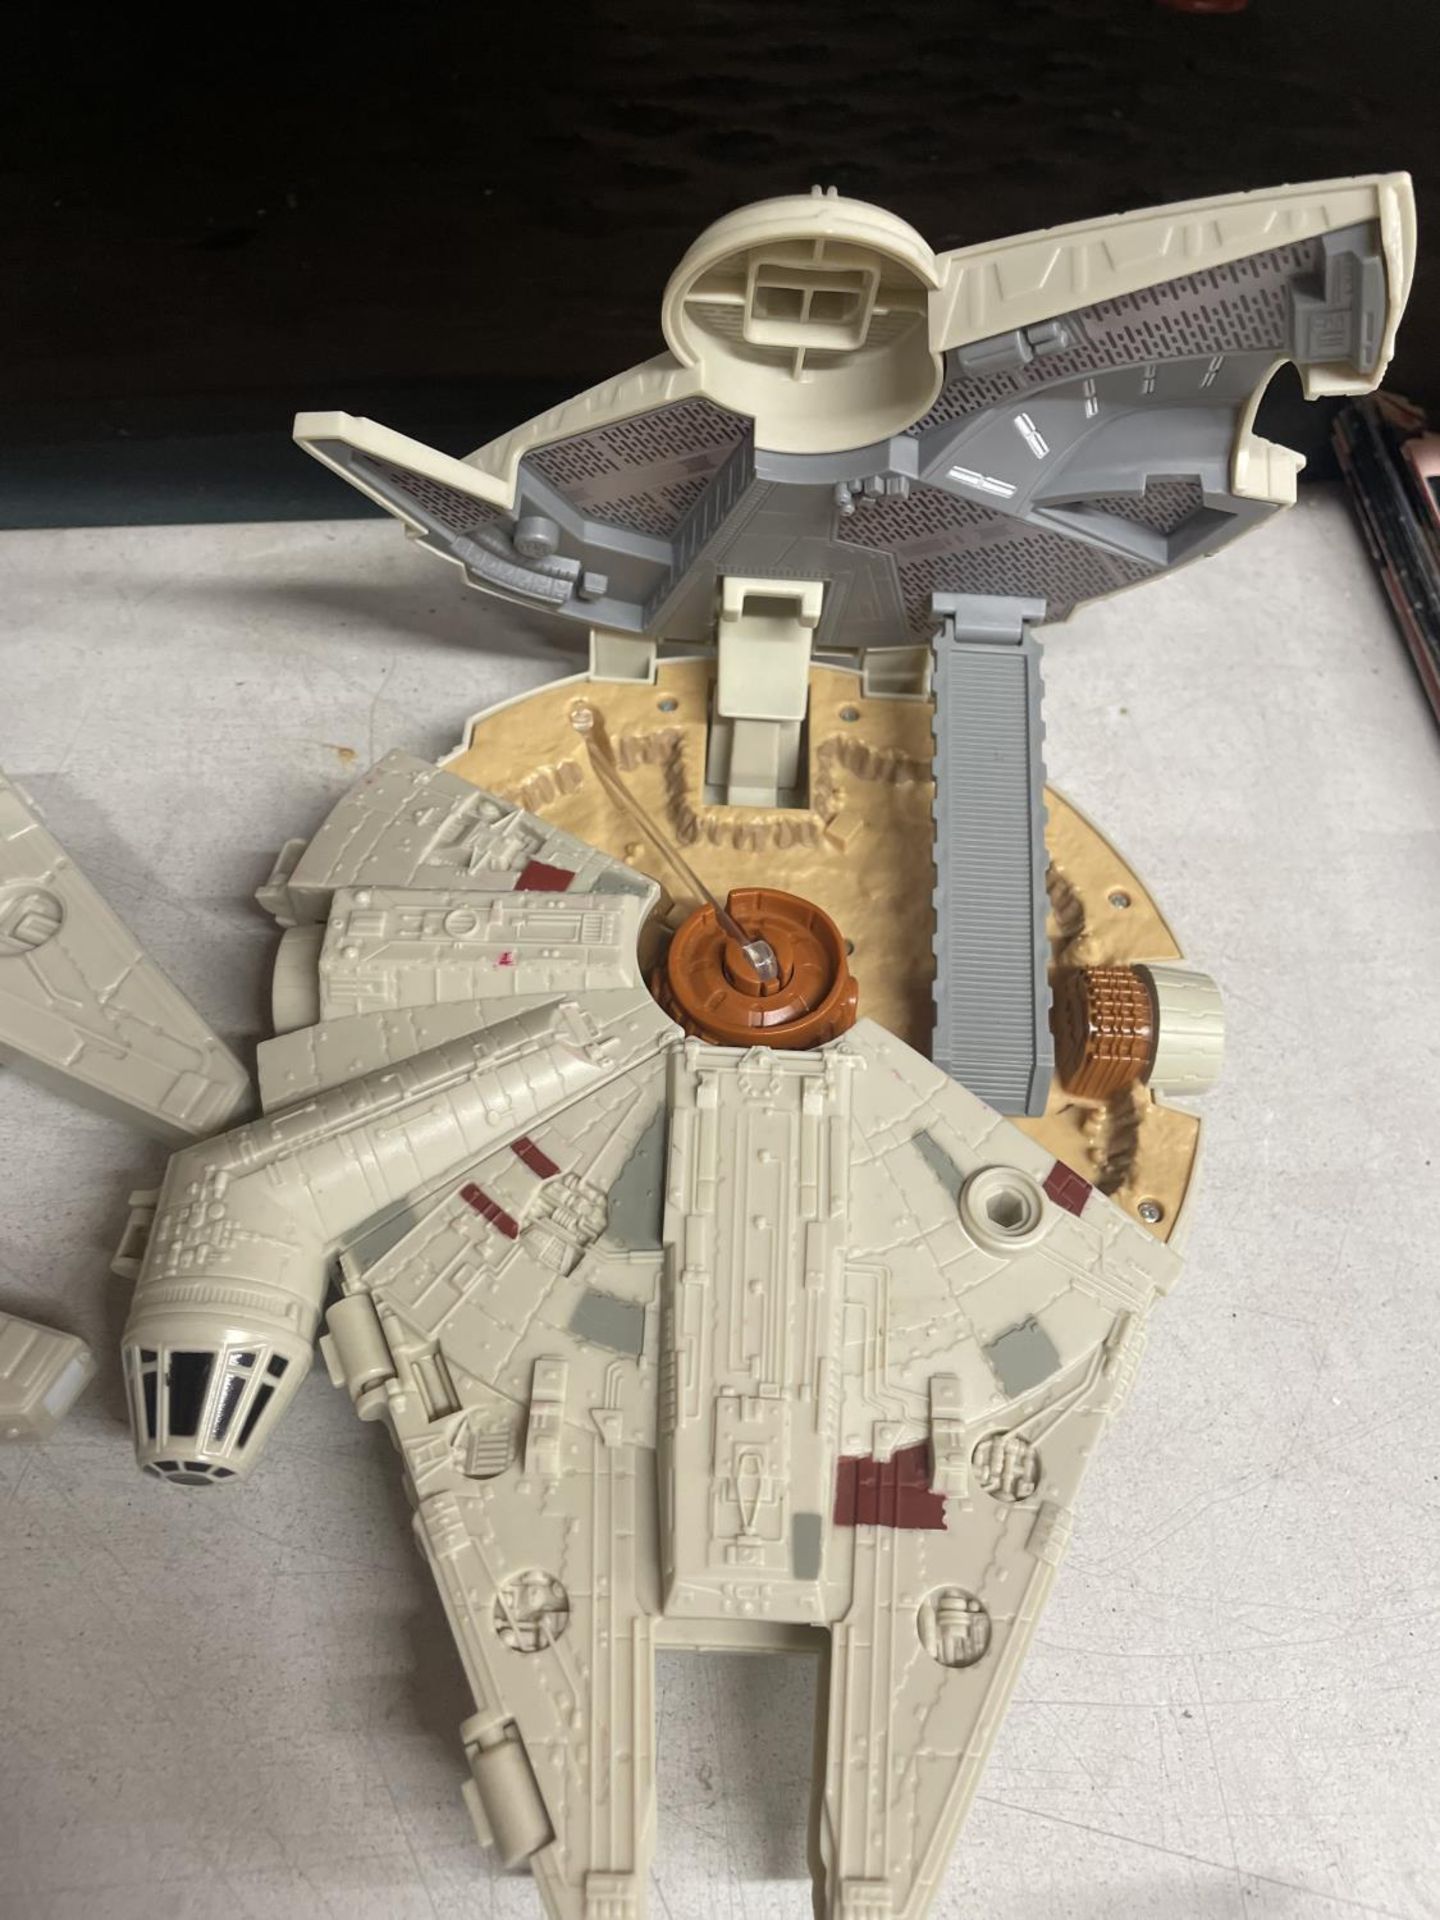 A MILLENIUM FALCON WALL LIGHT PLUS SMALL MODEL - Image 2 of 4